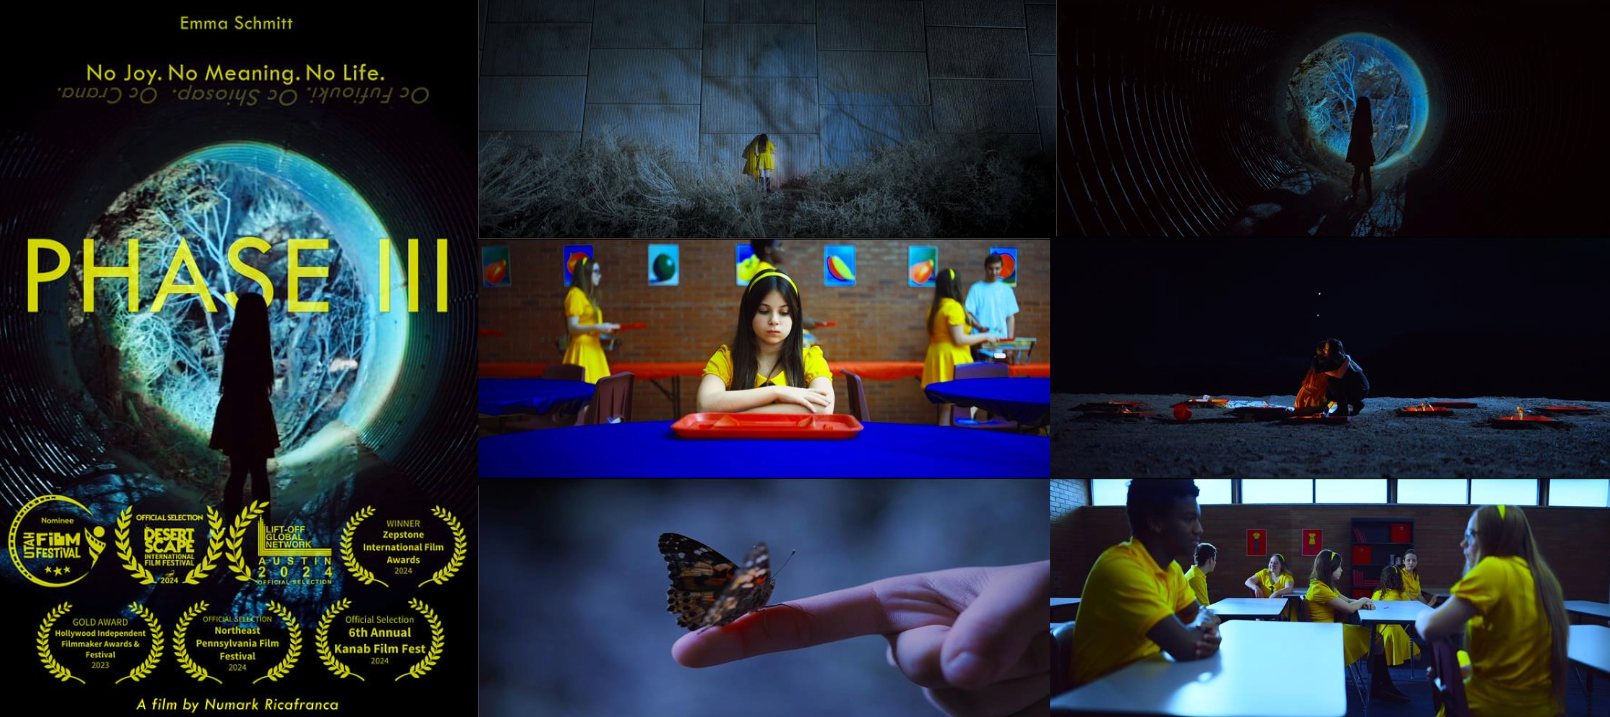 The poster and six stills from the film Phase III. The poster has a girl silhouetted before a circular tunnel that leads to a bright natural landscape with the yellow text "Phase III". The tagline "No Joy. No Meaning. No Life." is written in yellow text along the top. Beside this are six stills from the film. The first shows a girl in a yellow coat walking on pavement beside a thick hedge. The second is a highly saturated image of a girl in yellow staring at a red lunch tray on a blue table. The third is an image of an orange butterfly resting on a finger. The fourth image is a darker version of the image from the poster. The fifth shows two figures crouched down and hugging each other in a barren landscape. The final image shows a cafeteria full of people in bright yellow uniforms.